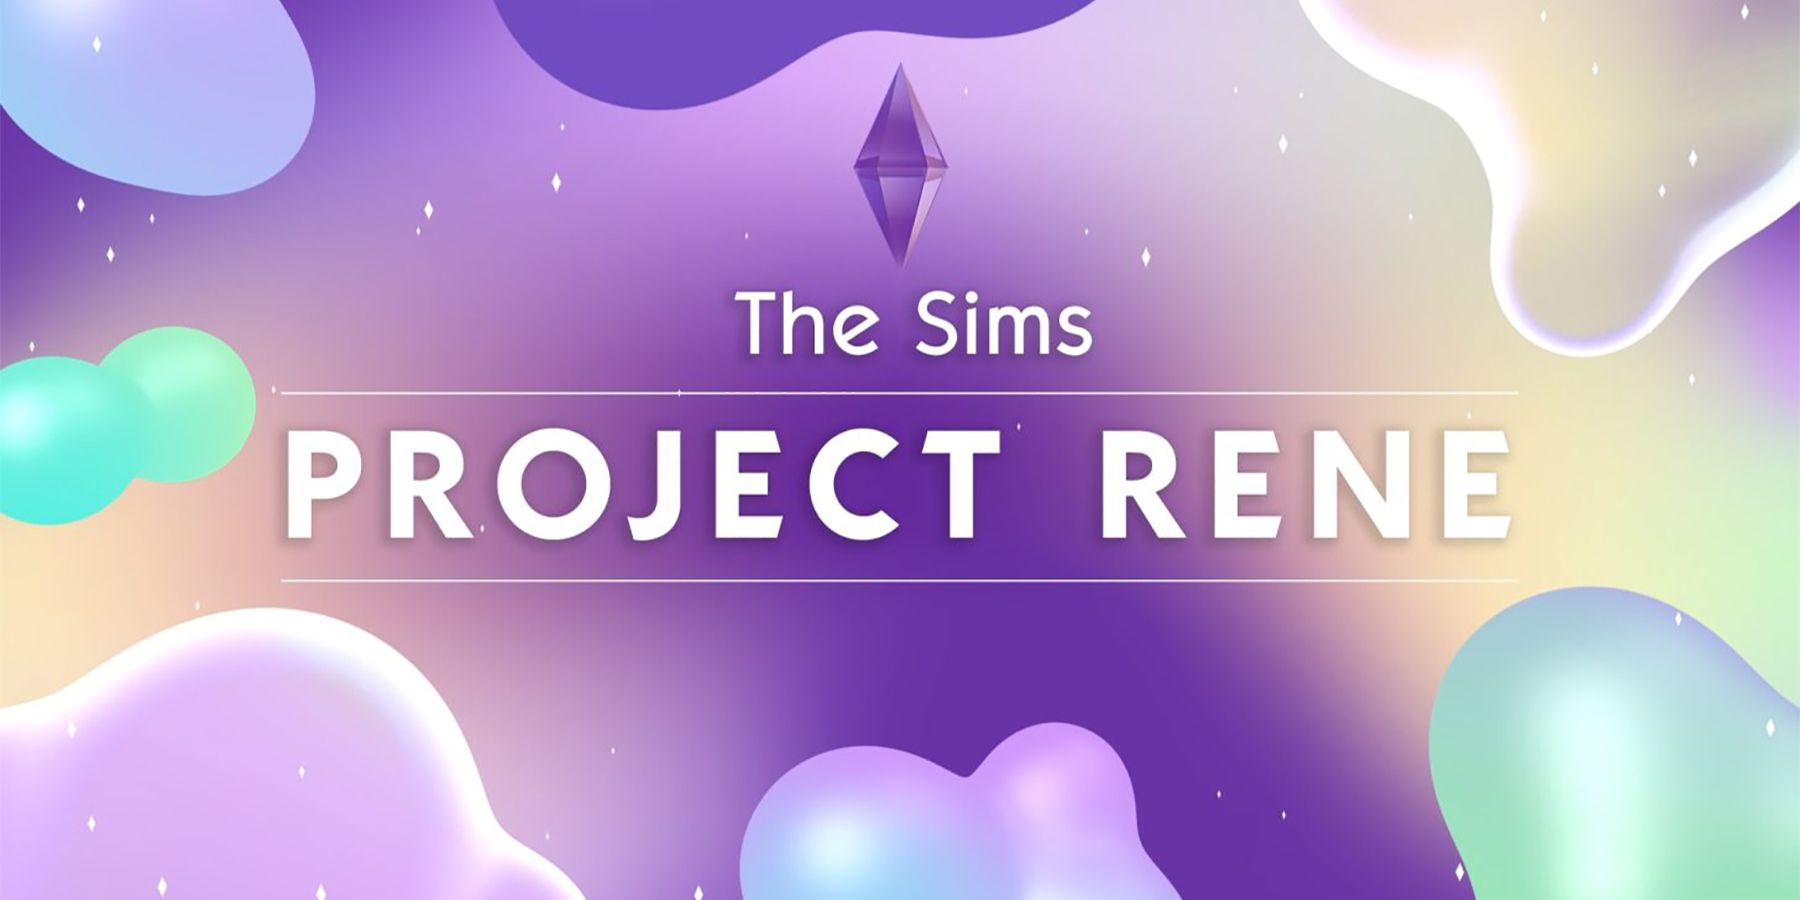 The Sims 5 Leak Reveals the Game’s Map